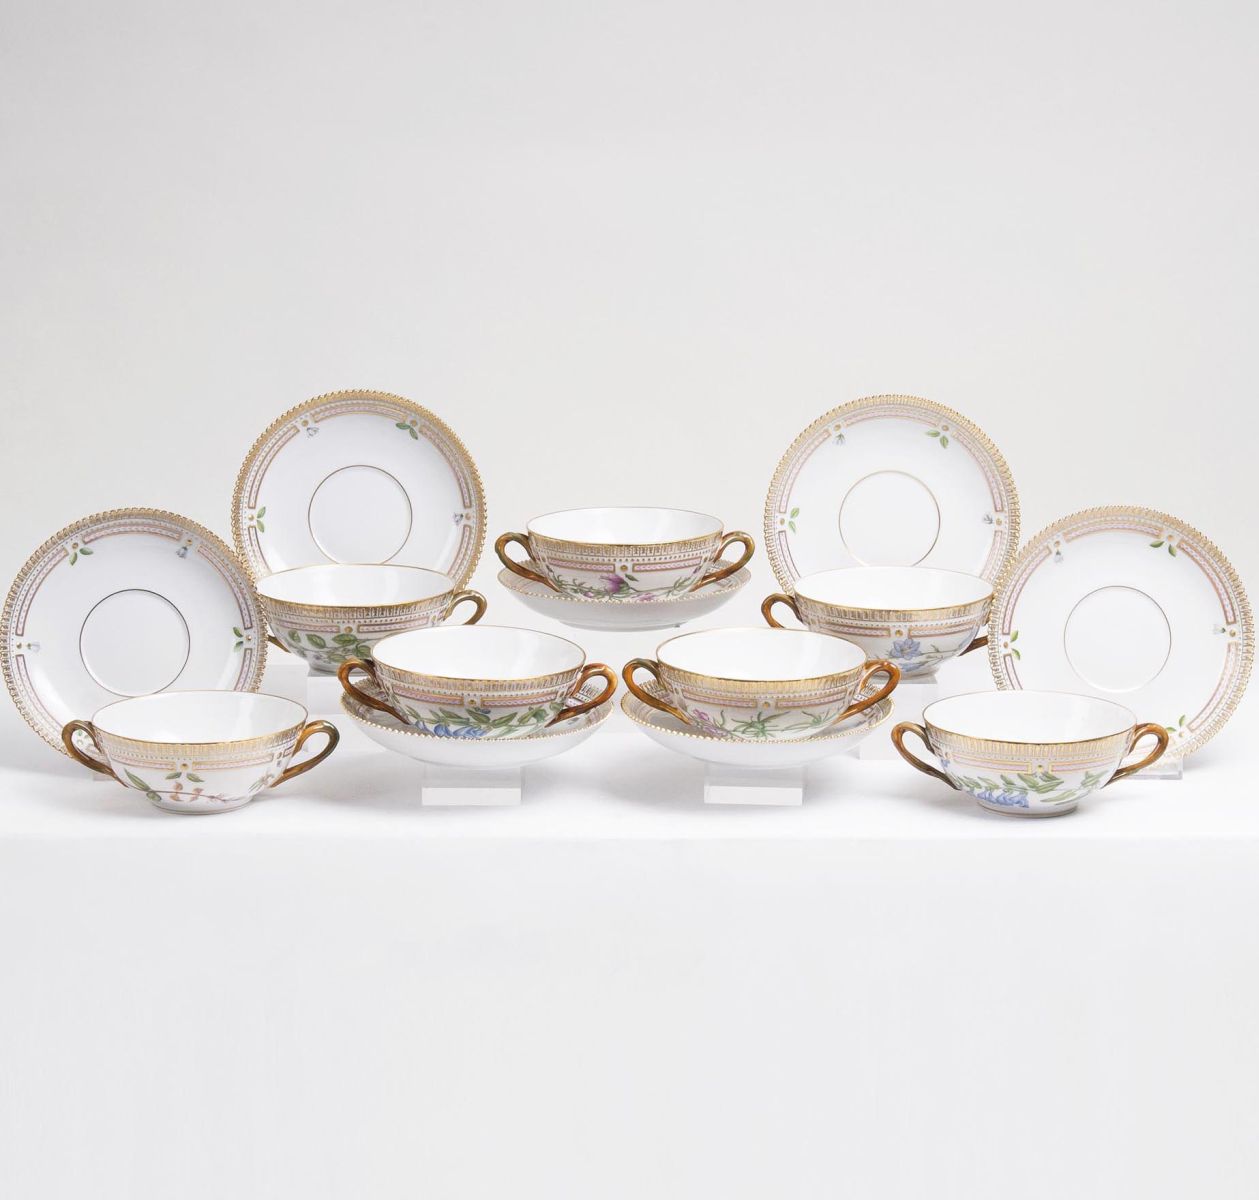 A Set of 7 Flora Danica Soup Cups with Saucers